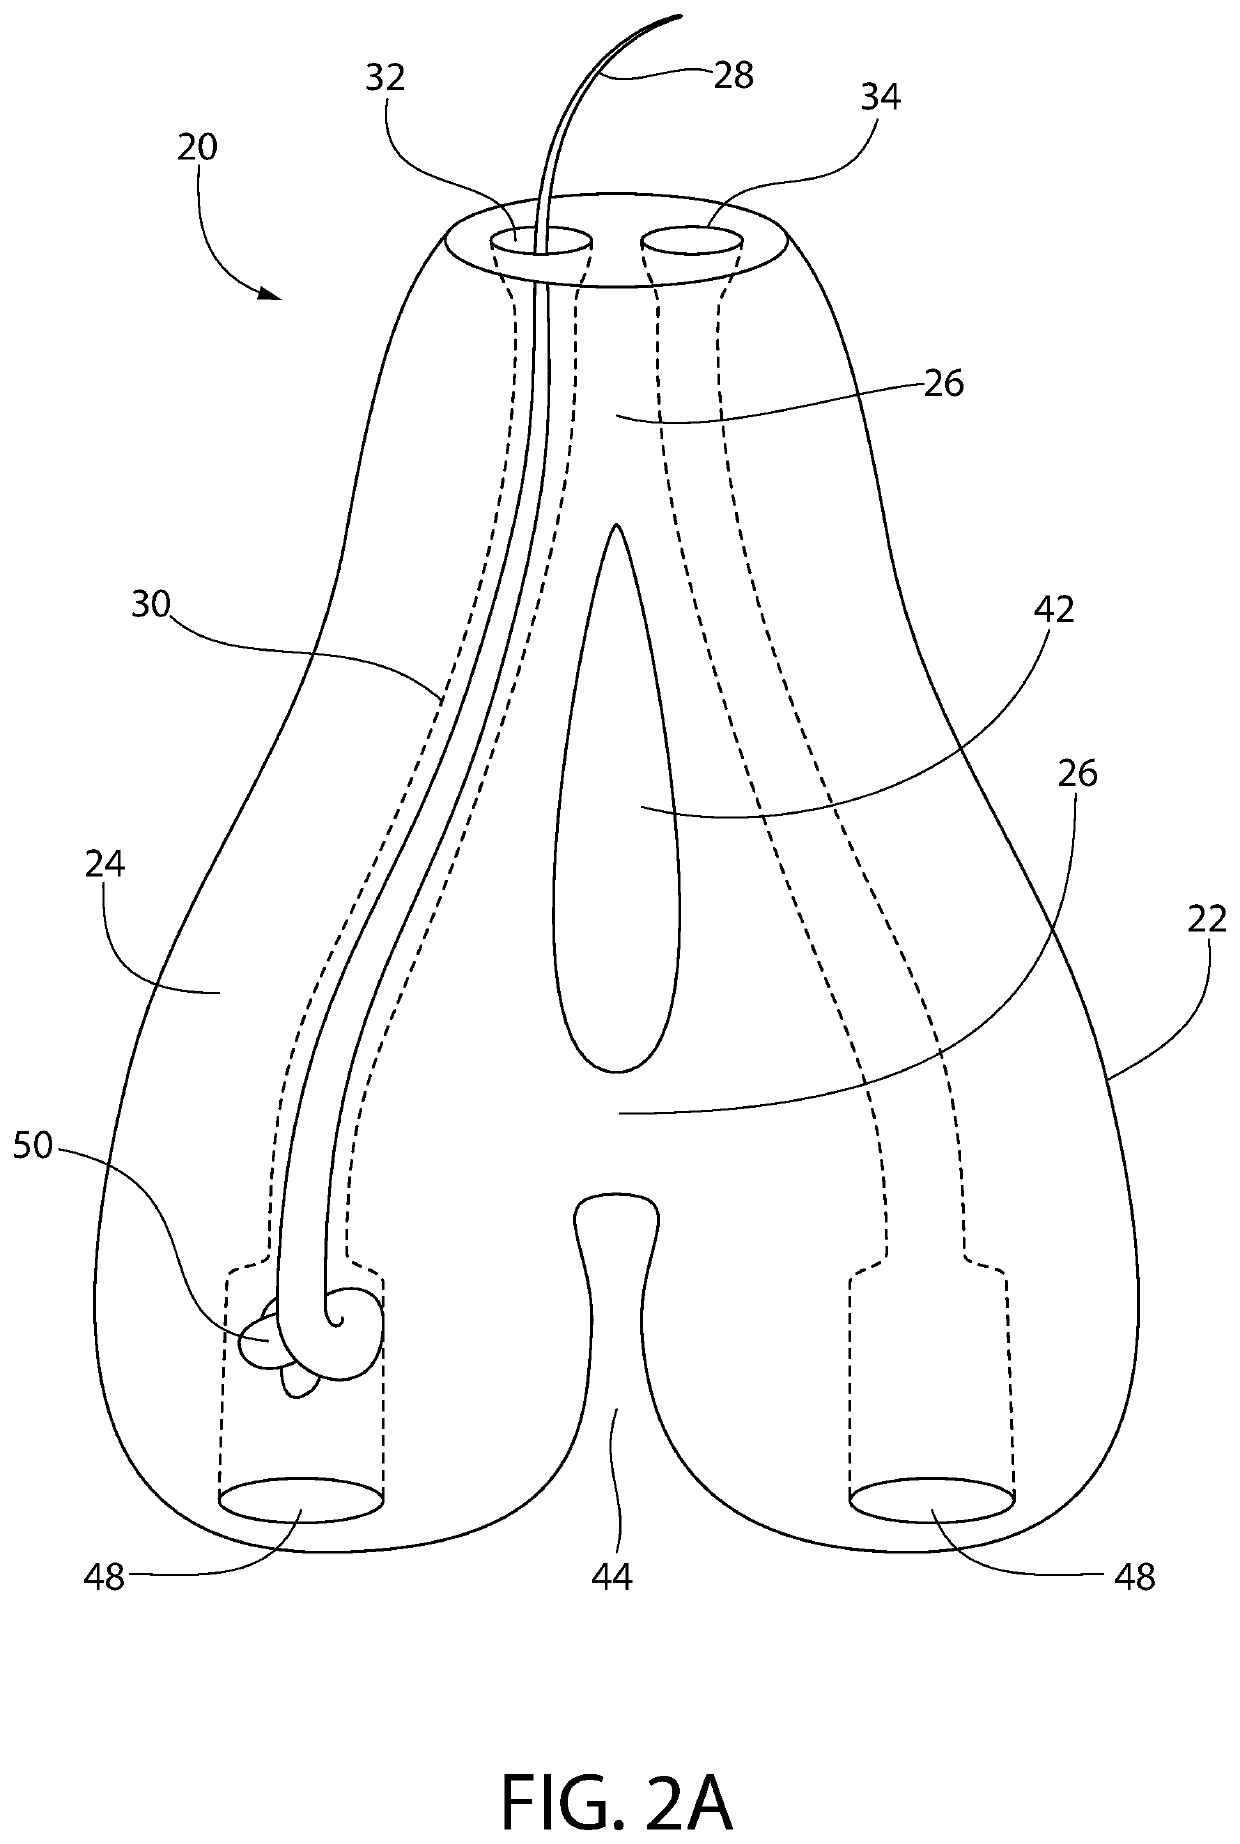 Hair implants comprising enhanced anchoring and medical safety features